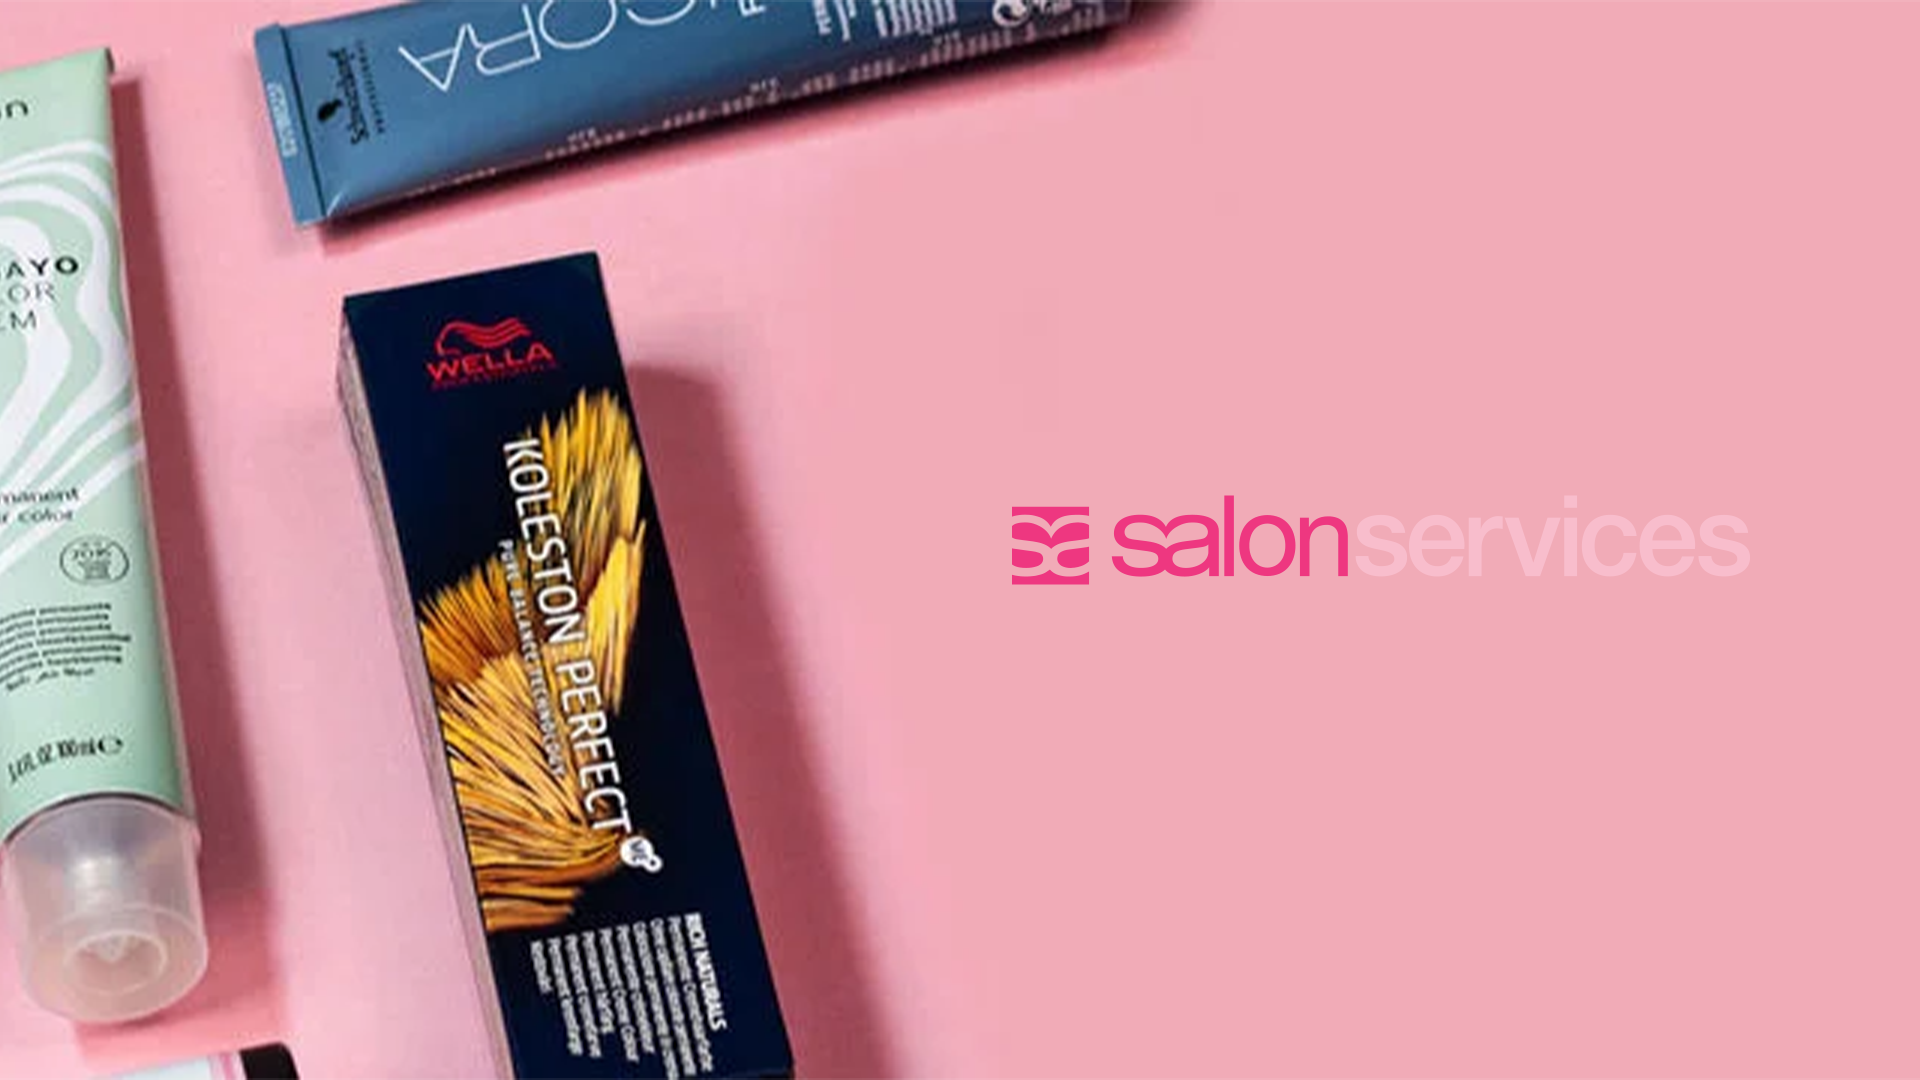 How V1CE’s Digital Business Cards Helped Salon Services PRO Overcome the "Drop-Off" Approach And Make More Meaningful Connections